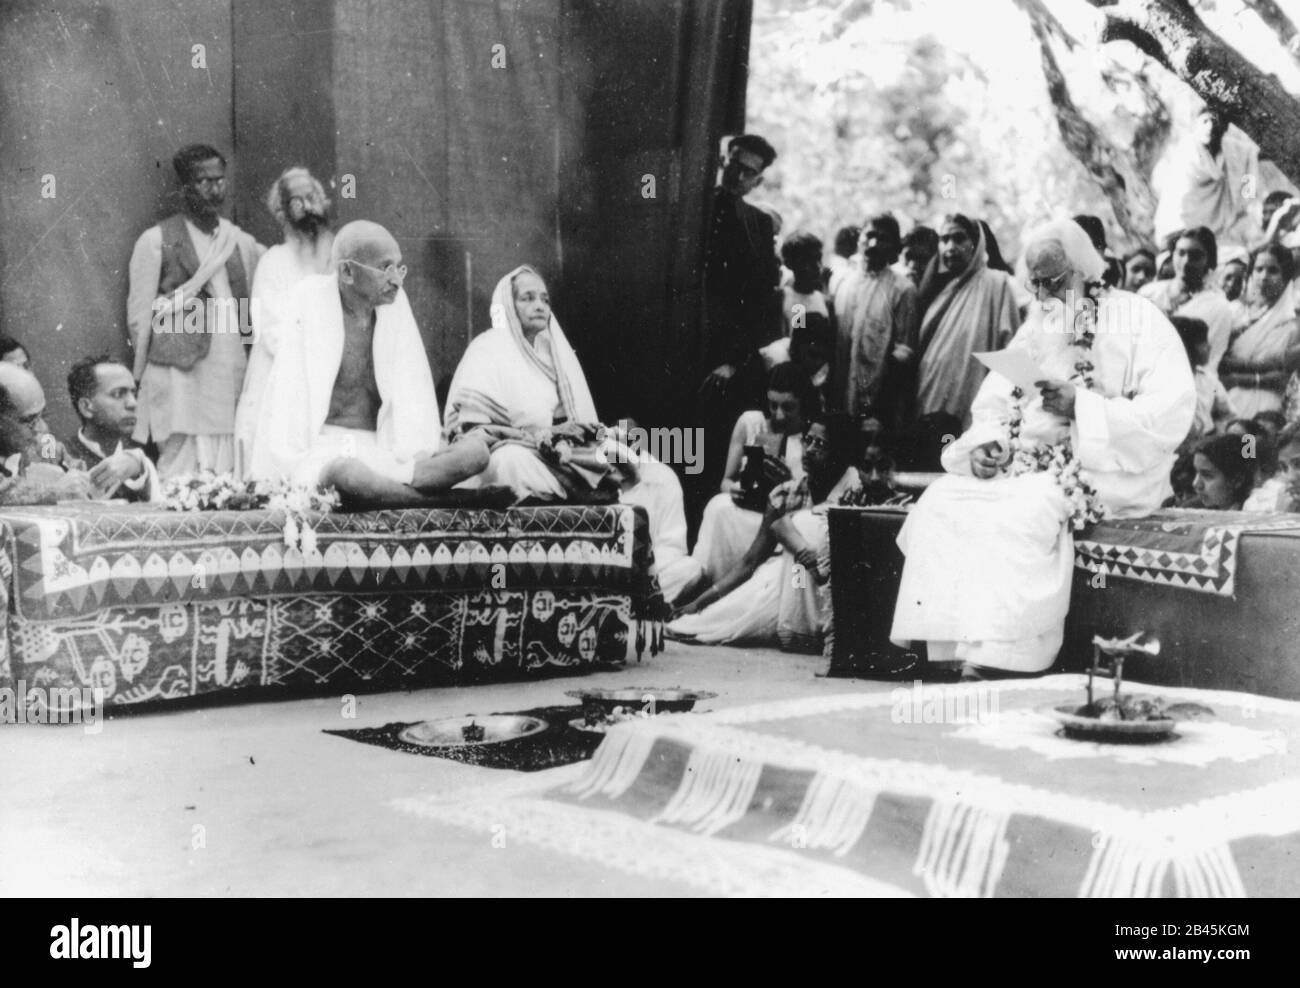 Rabindranath Tagore welcome speech for Mahatma Gandhi and his wife Kasturba Gandhi, Shantiniketan, West Bengal, India, Asia, February 1940, old vintage 1900s picture Stock Photo